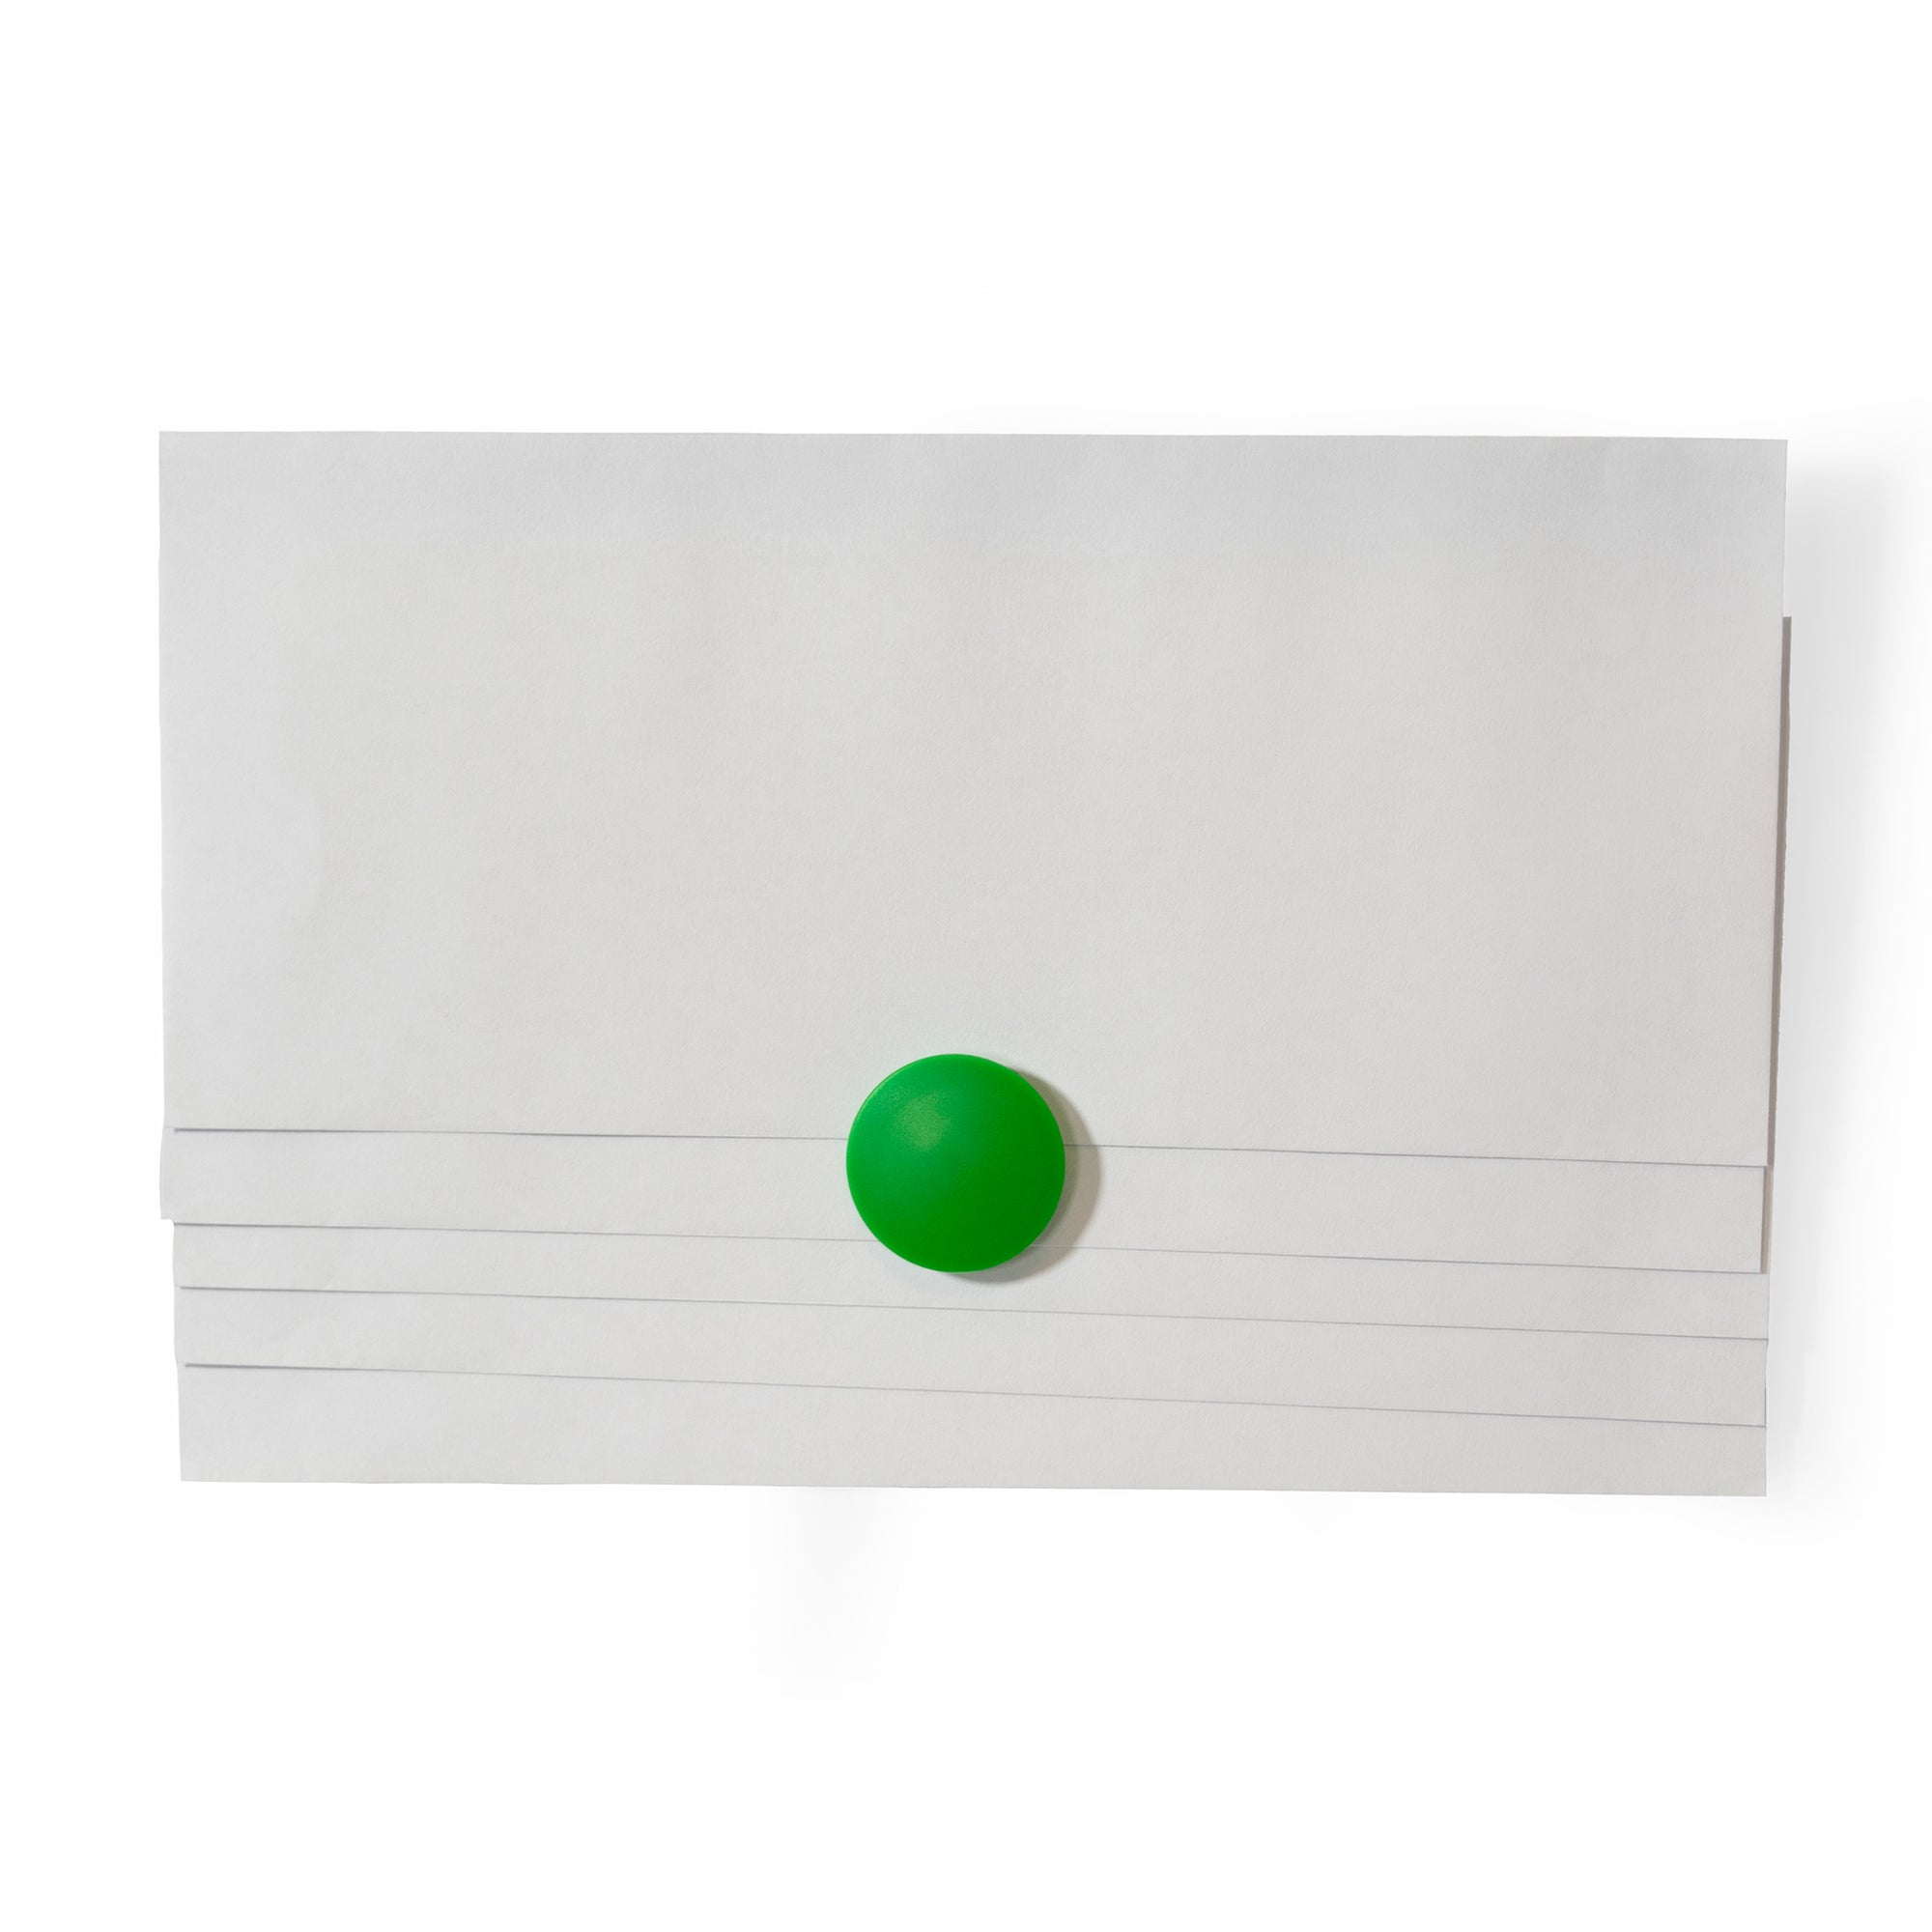 High Powered Magnets for Glass Dry-Erase Boards, Set of 5 Green.  Holding Envelopes on glass board. 